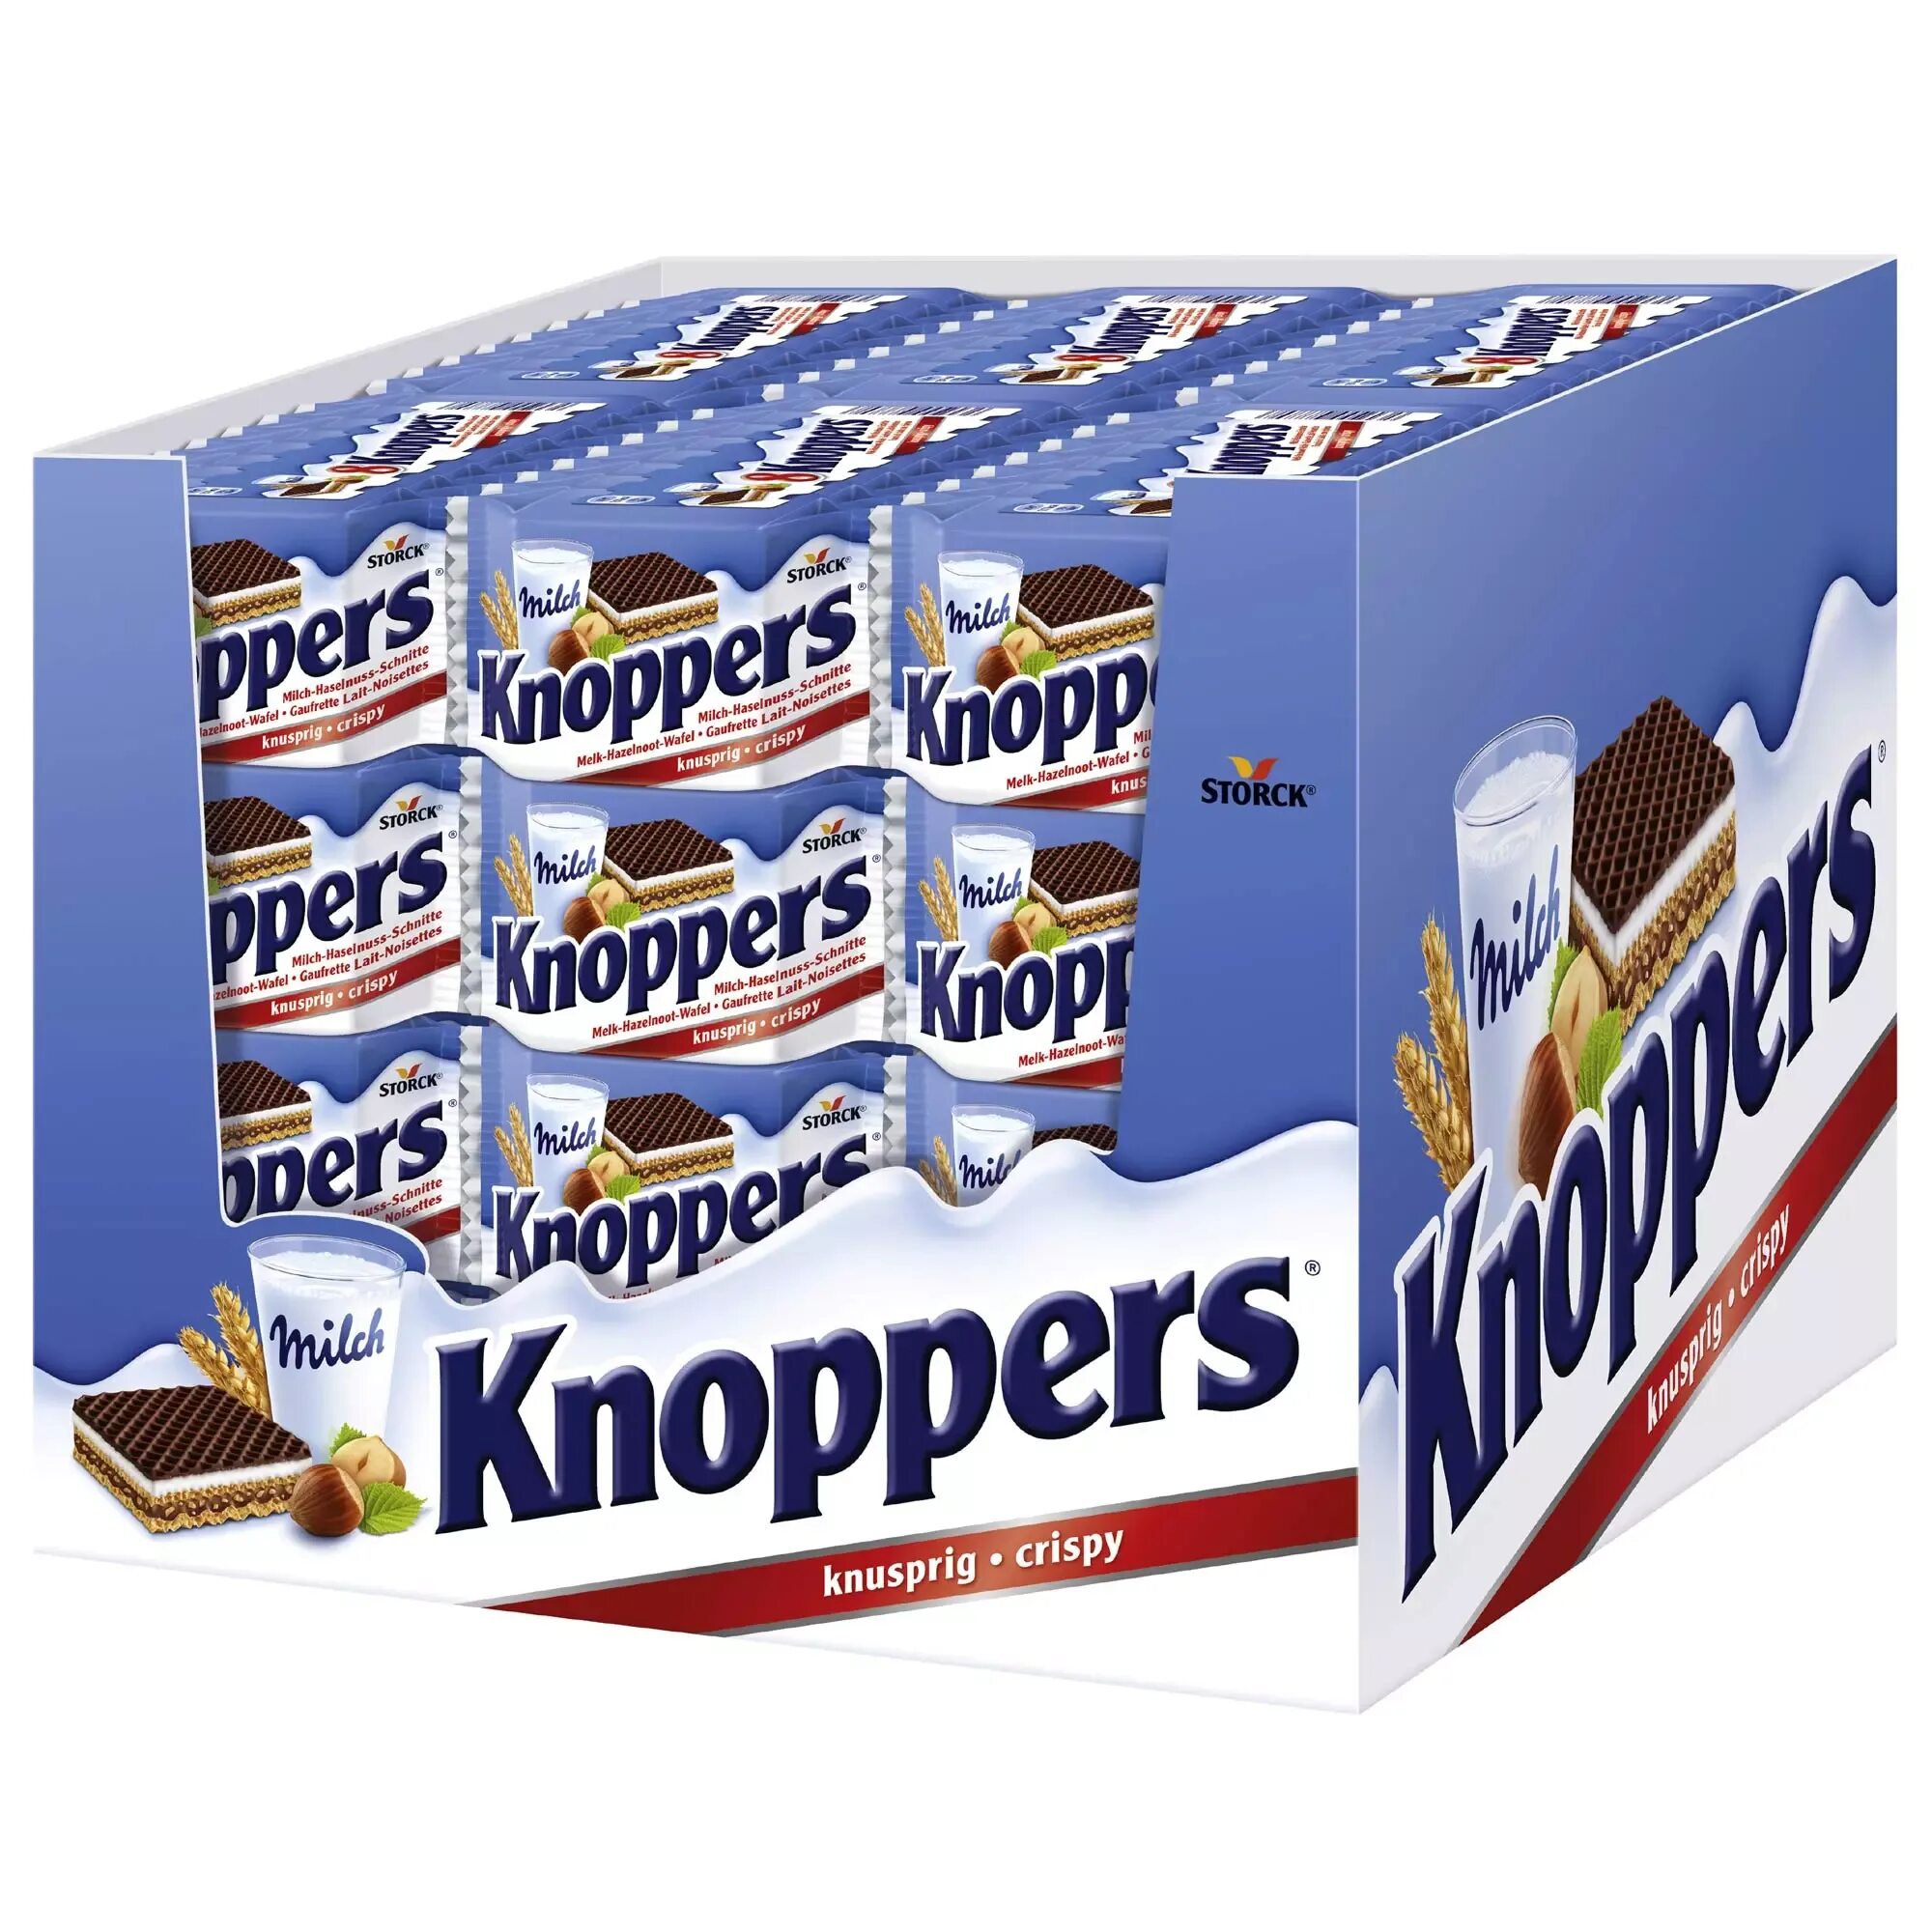 Storck knoppers. Knoppers вафли. Конфеты knoppers. Вафли немецкие knoppers.